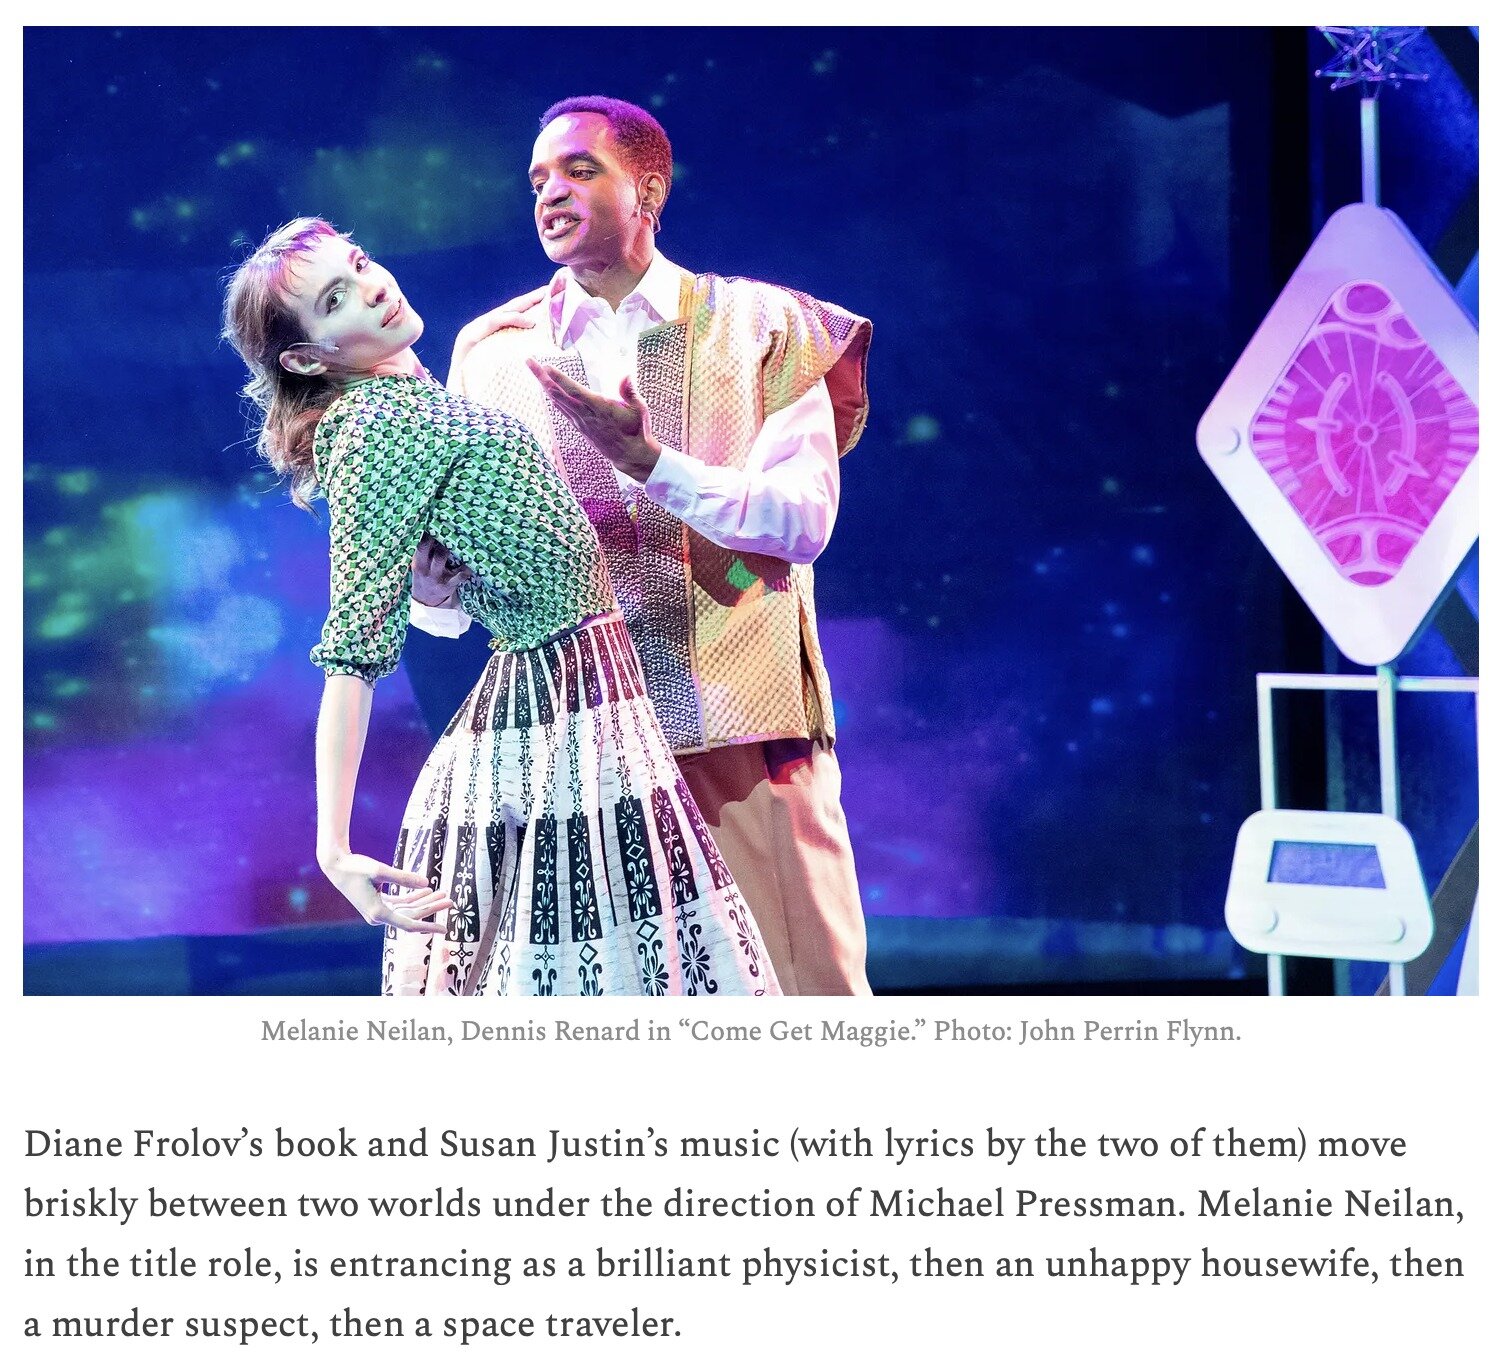 &ldquo;A a zippy and brand-new musical. Offers hope that the company might explore others. It&rsquo;s an amusingly loopy plot, but fortunately it ends back on earth. Exemplary performances&hellip; every clever lyric is relatively easy to hear.&rdquo;